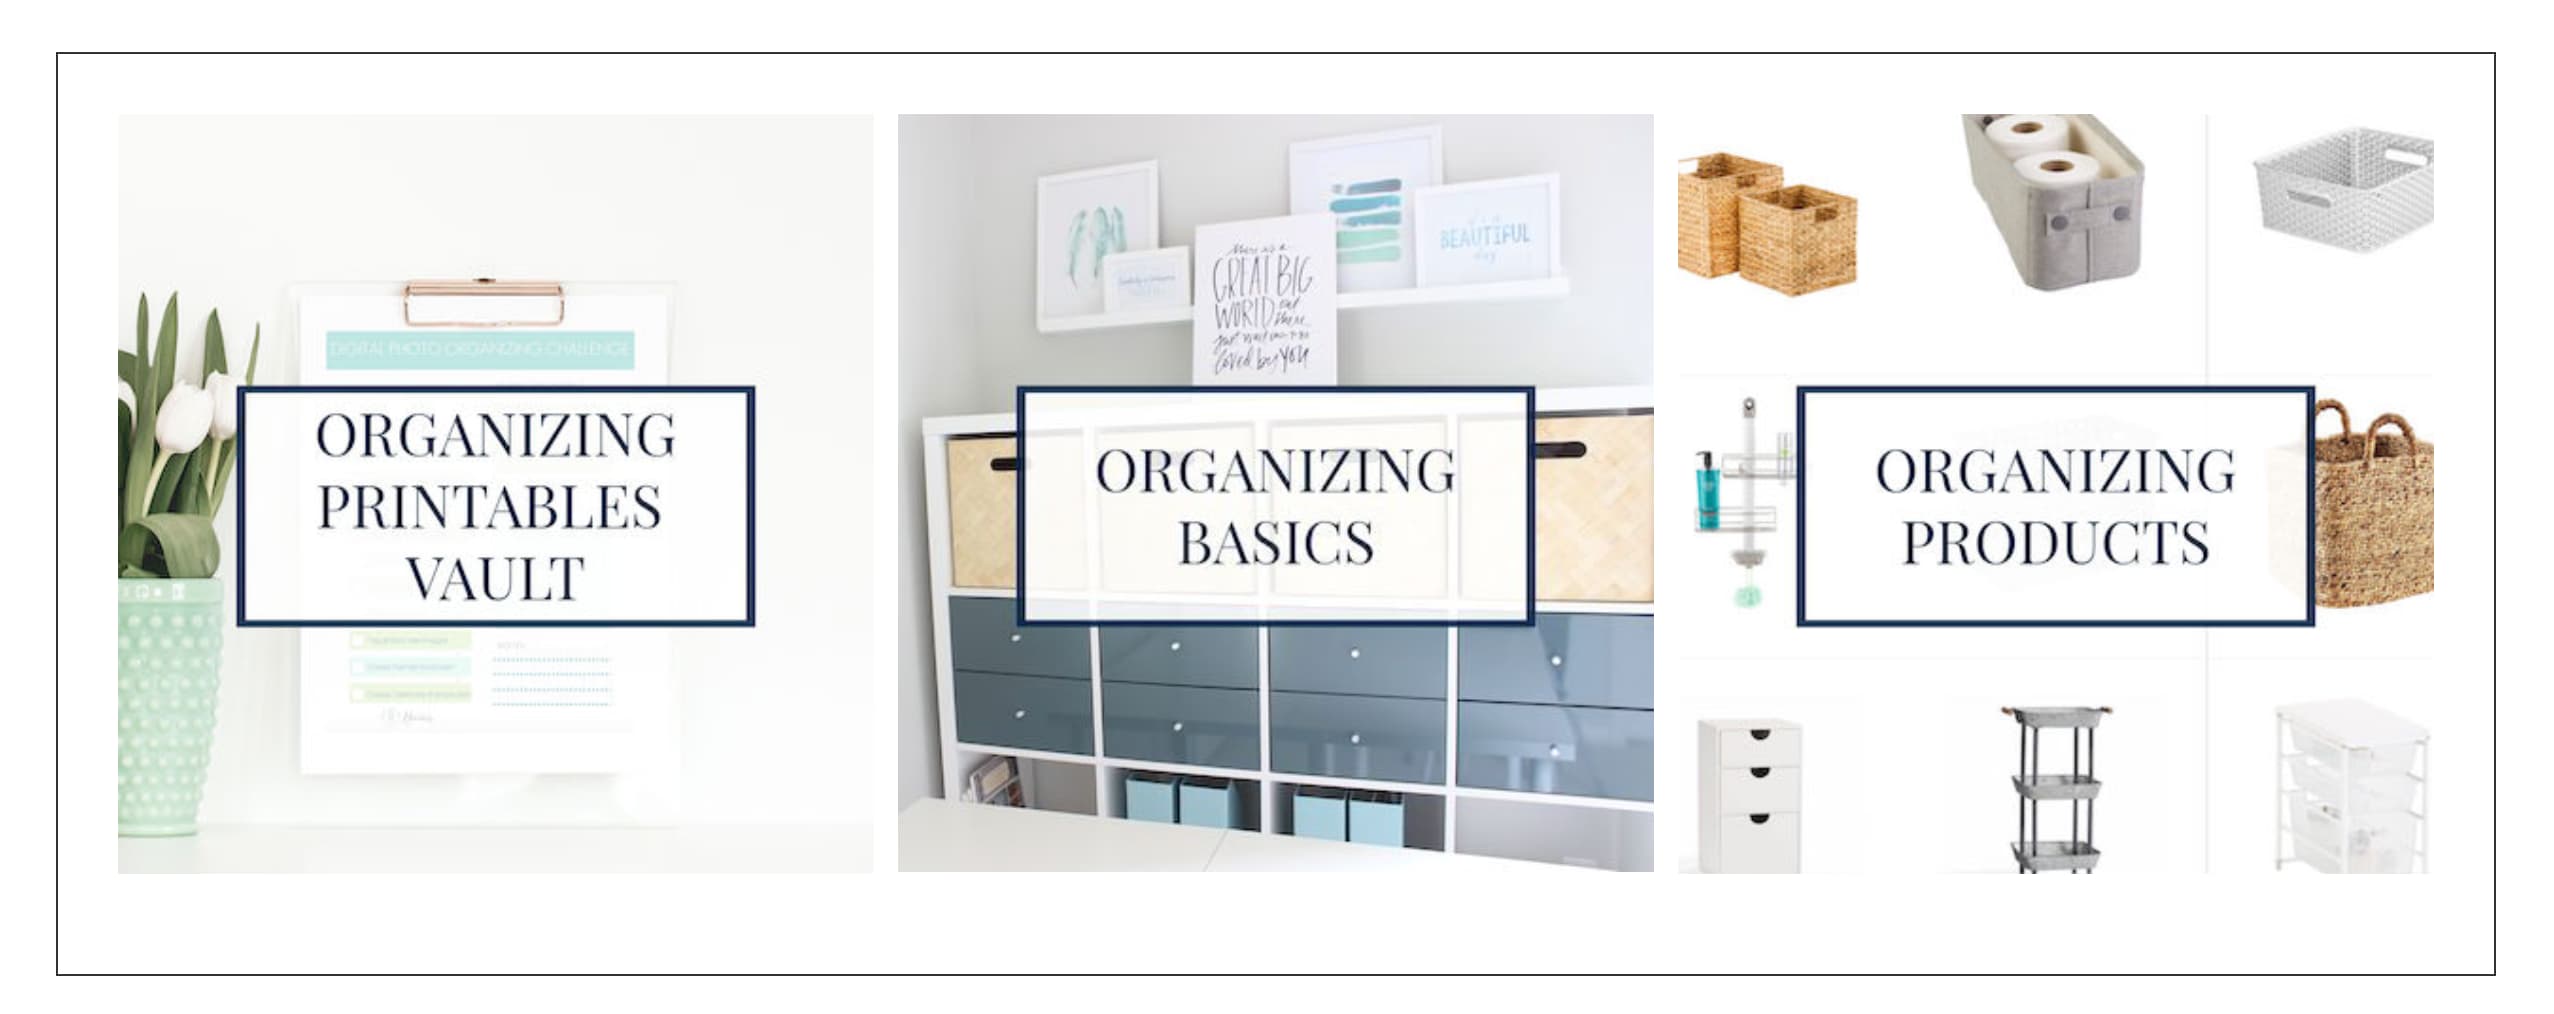 Series of home organizing images - organizing printables, organizing basics, organizing products for Refined Rooms